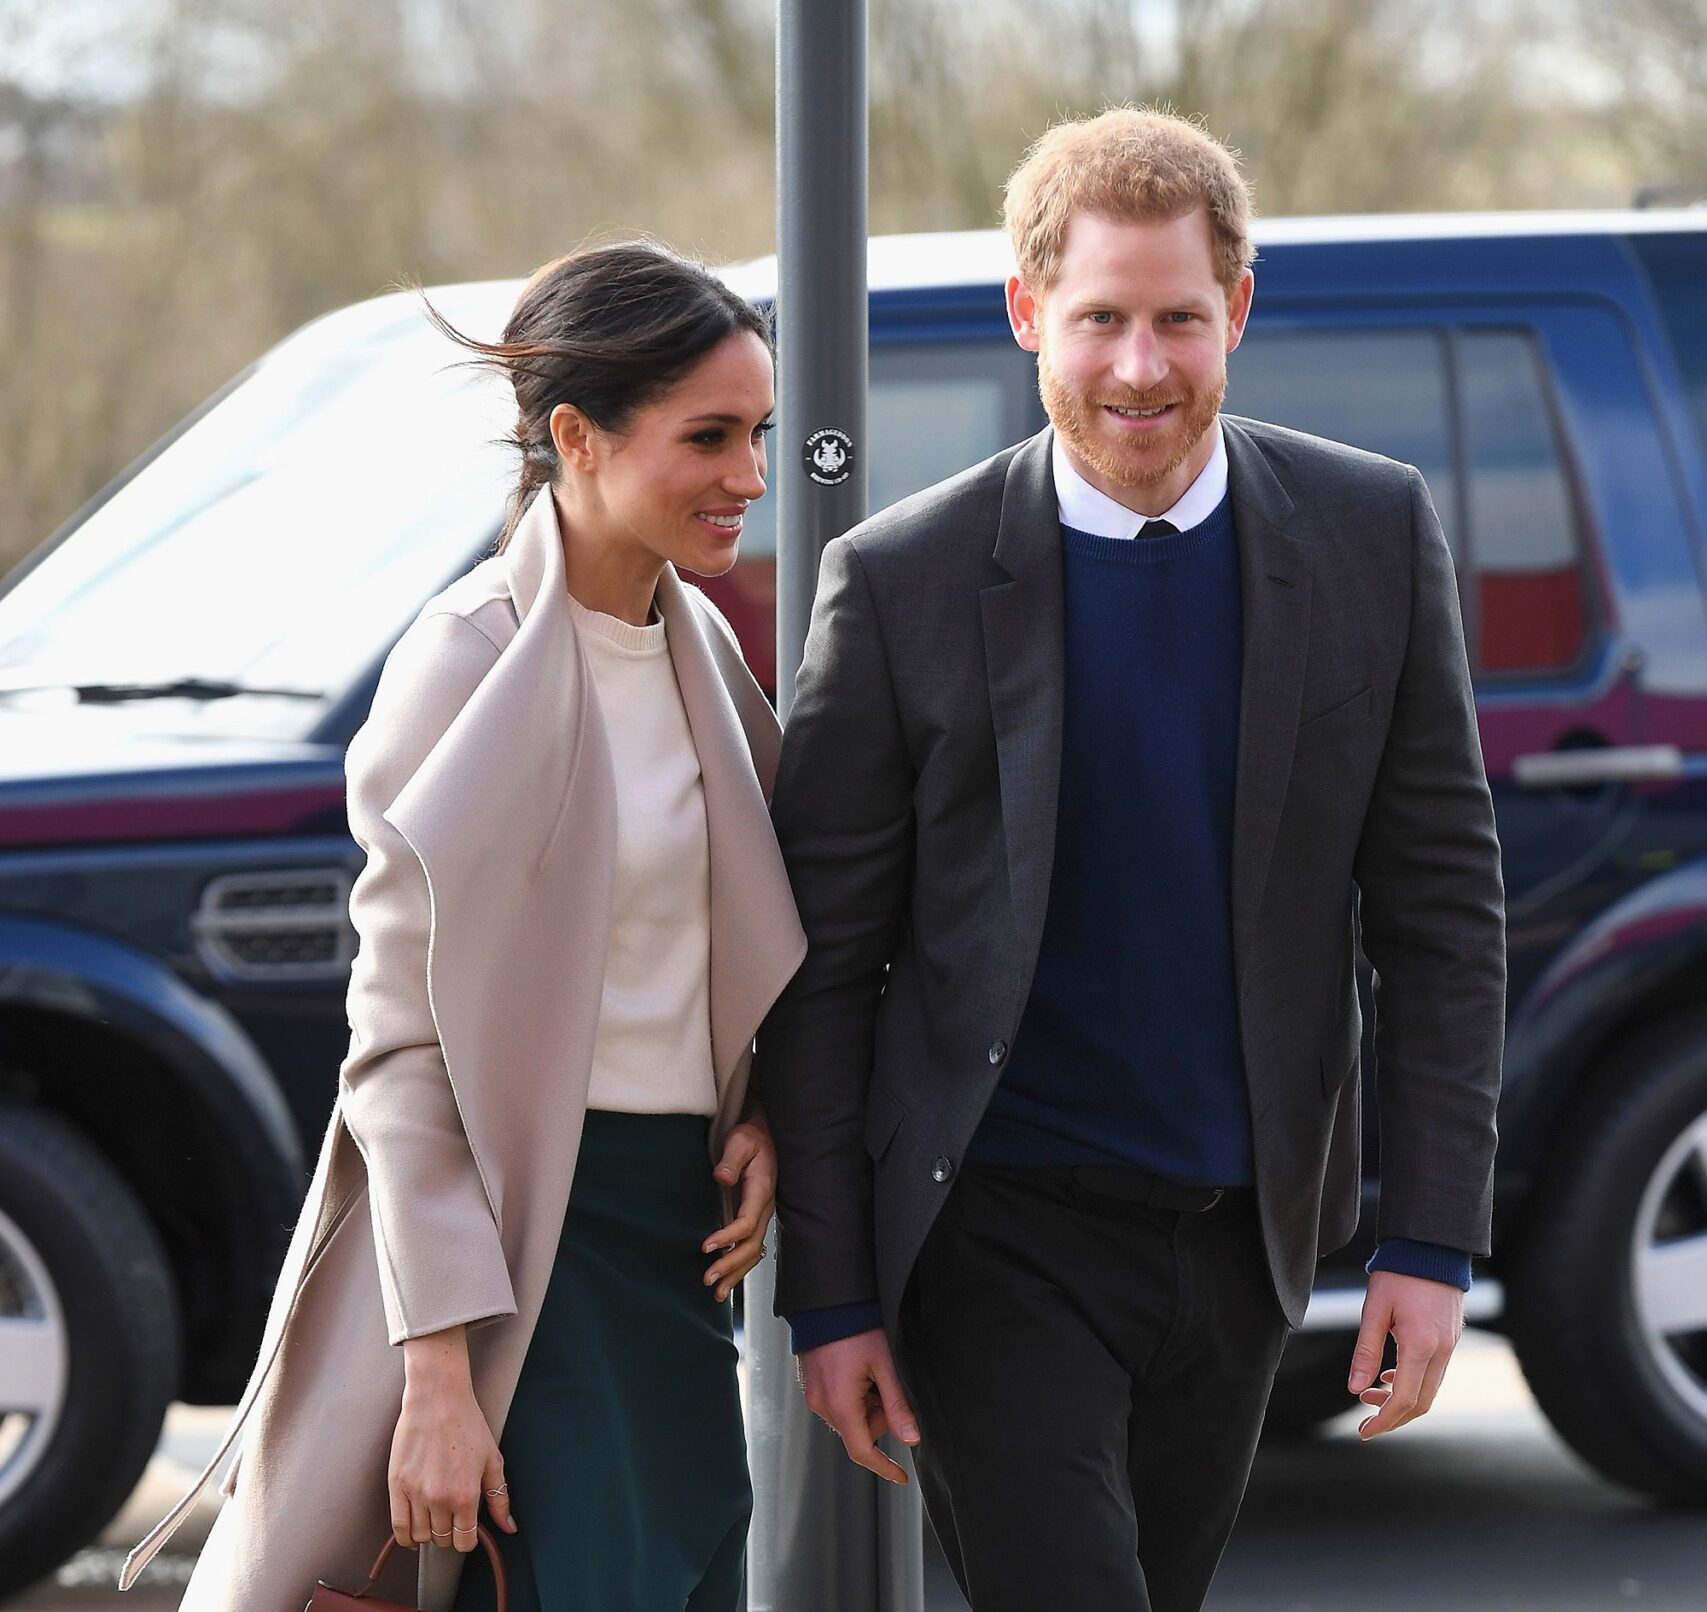 Meghan Markle and Prince Harry, Duke of Sussex